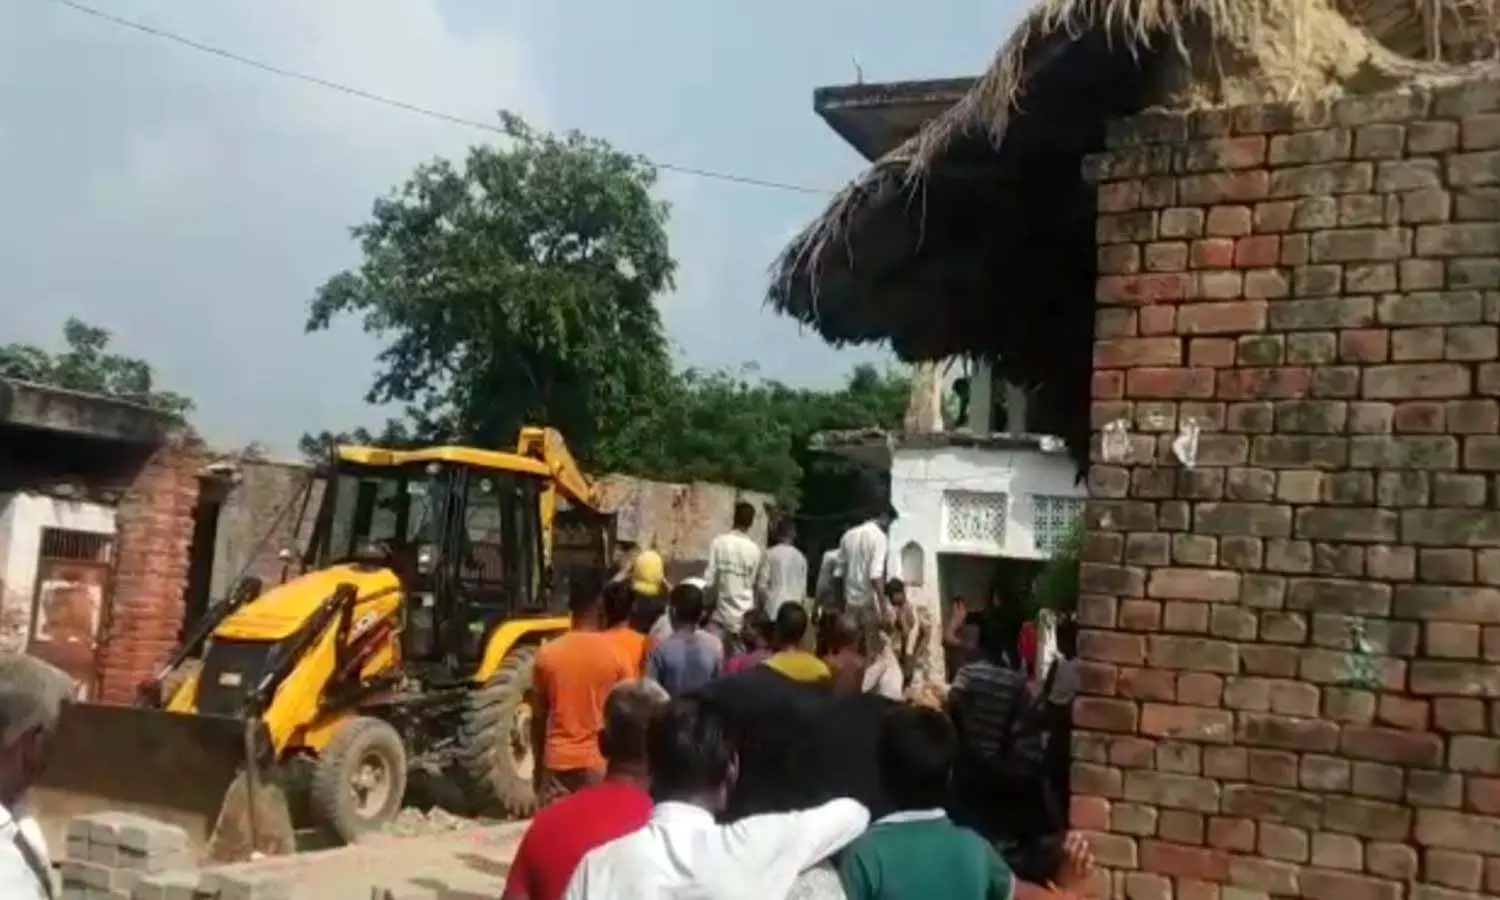 Yogi governments bulldozer roared again, demolished the houses built by occupying the pond